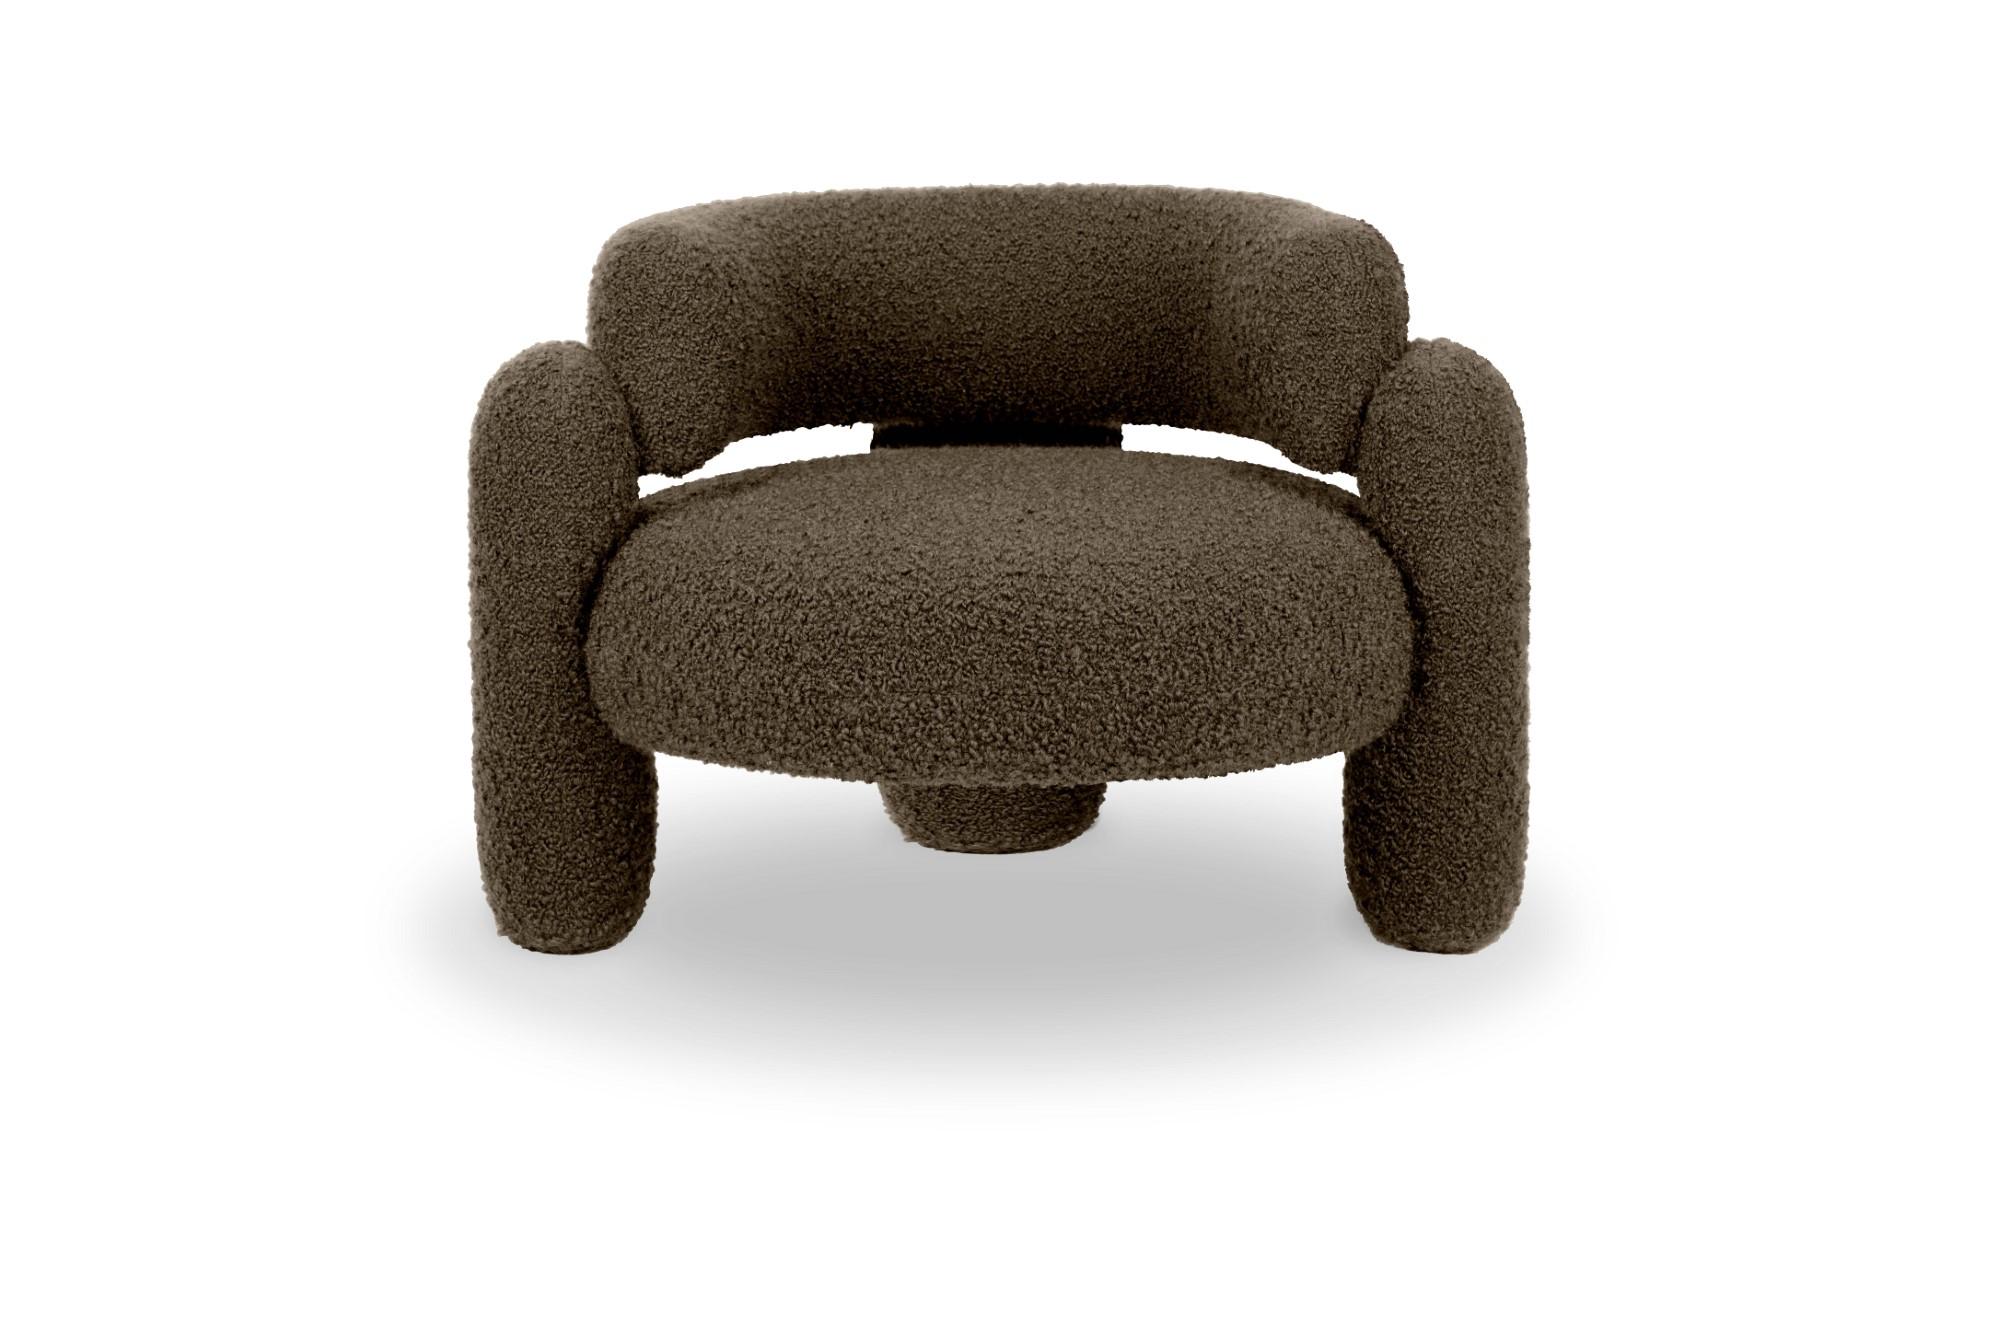 Embrace cormo chocolate armchair by Royal Stranger
Dimensions: w 96 x d 85 x h 68 cm.
Different upholstery colors and finishes are available. 

Featuring an enfolding composition of geometrical shapes, the Embrace Armchair will cozy you up in a